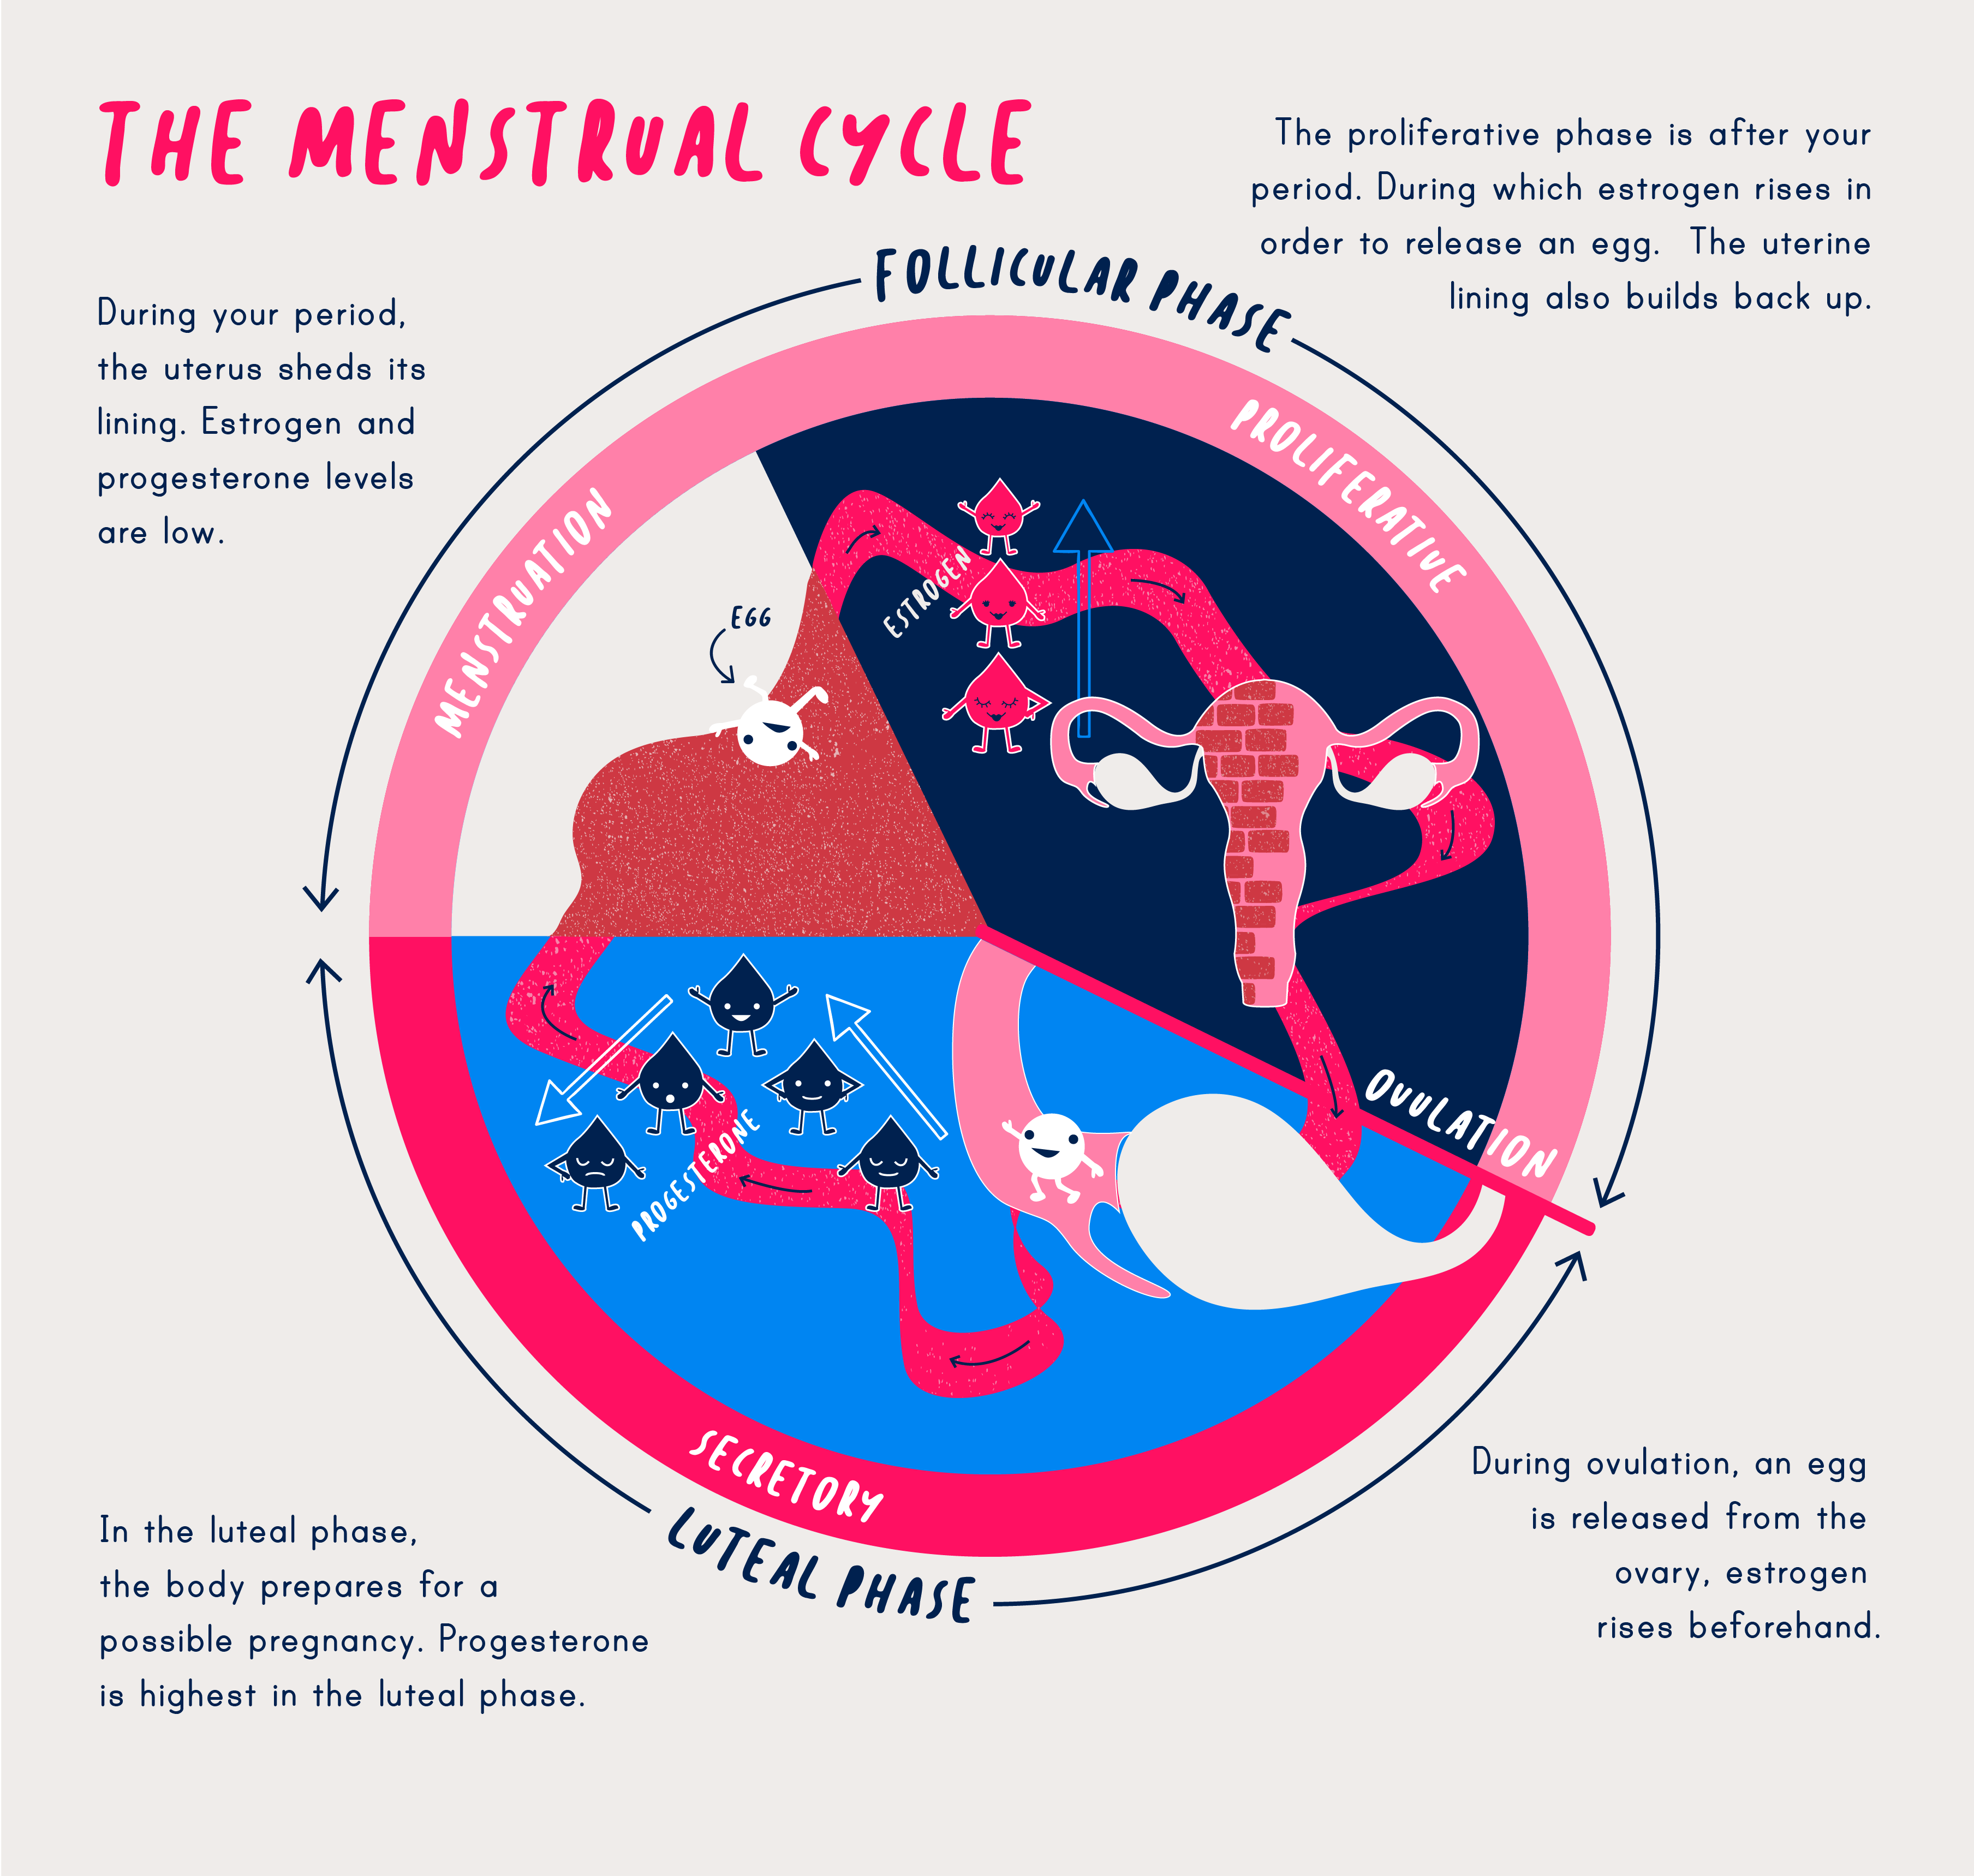 How the Menstrual Cycle Works